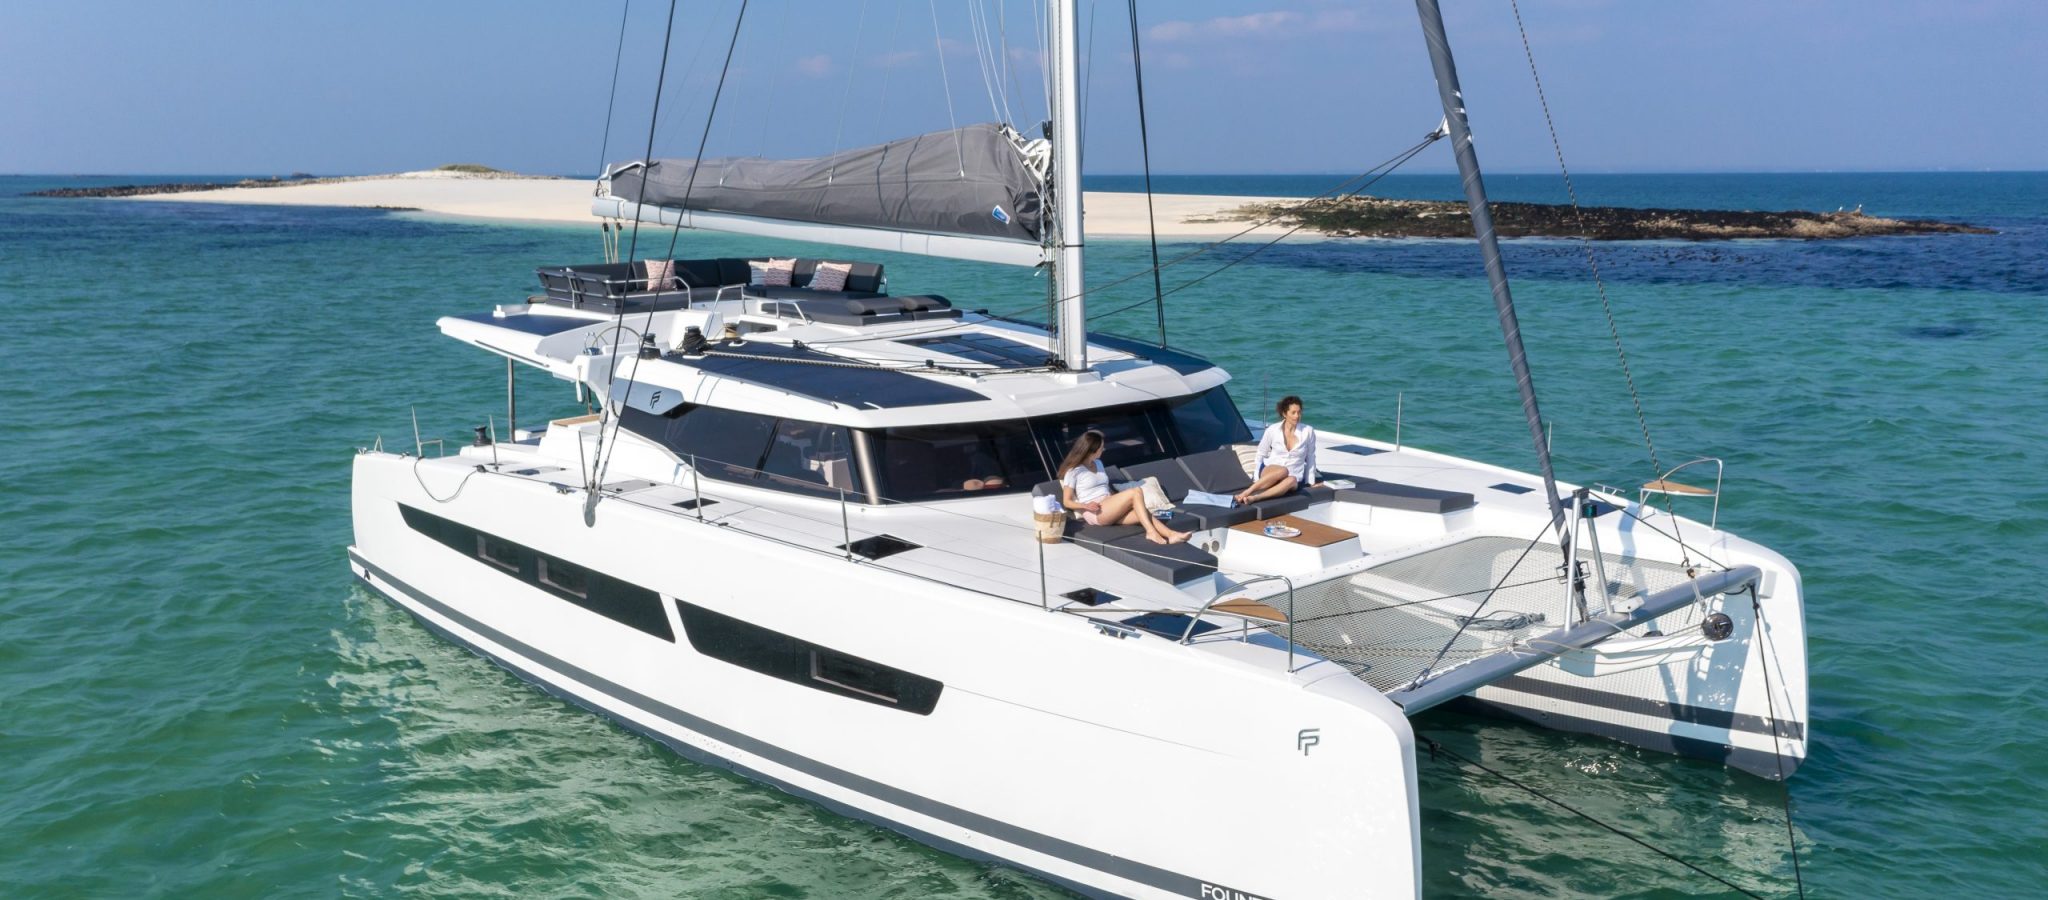 Fountaine Pajot shipyard, the new Fountaine Pajot 51, south Brittany on march 7, 2022, photo © Jean-Marie LIOT - www.jmliot.com